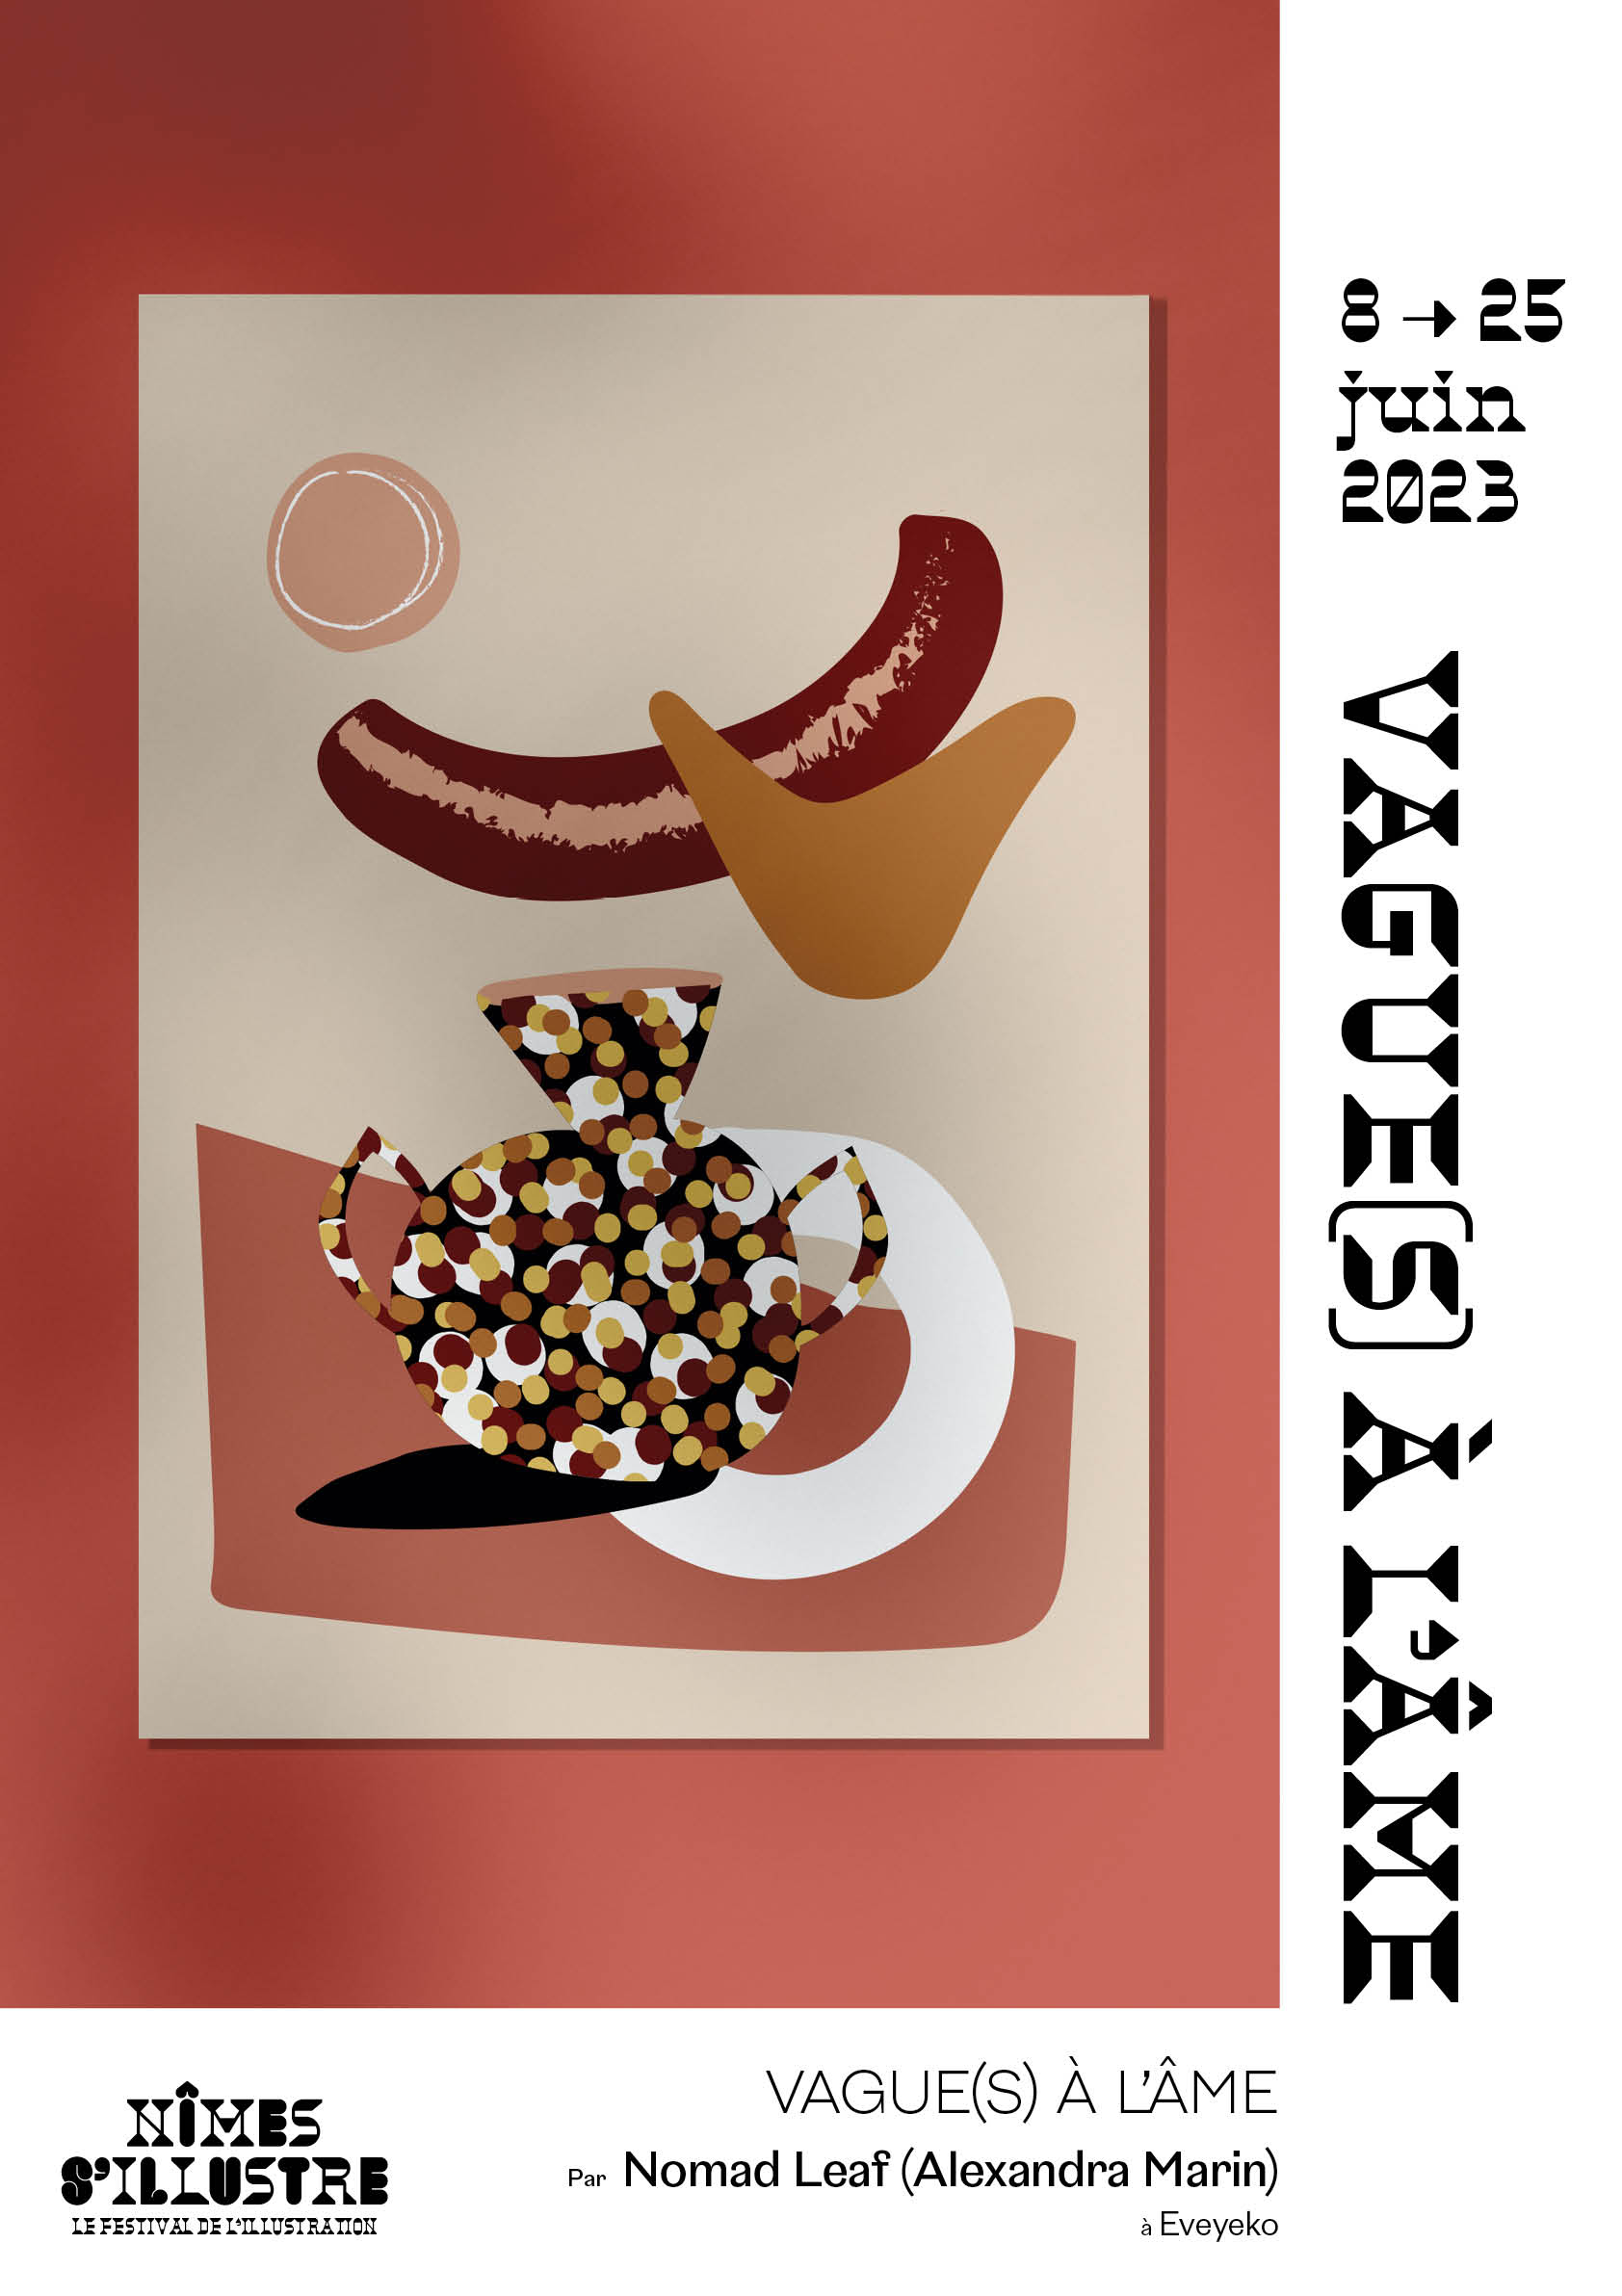 Affiche-expo-vaguealame